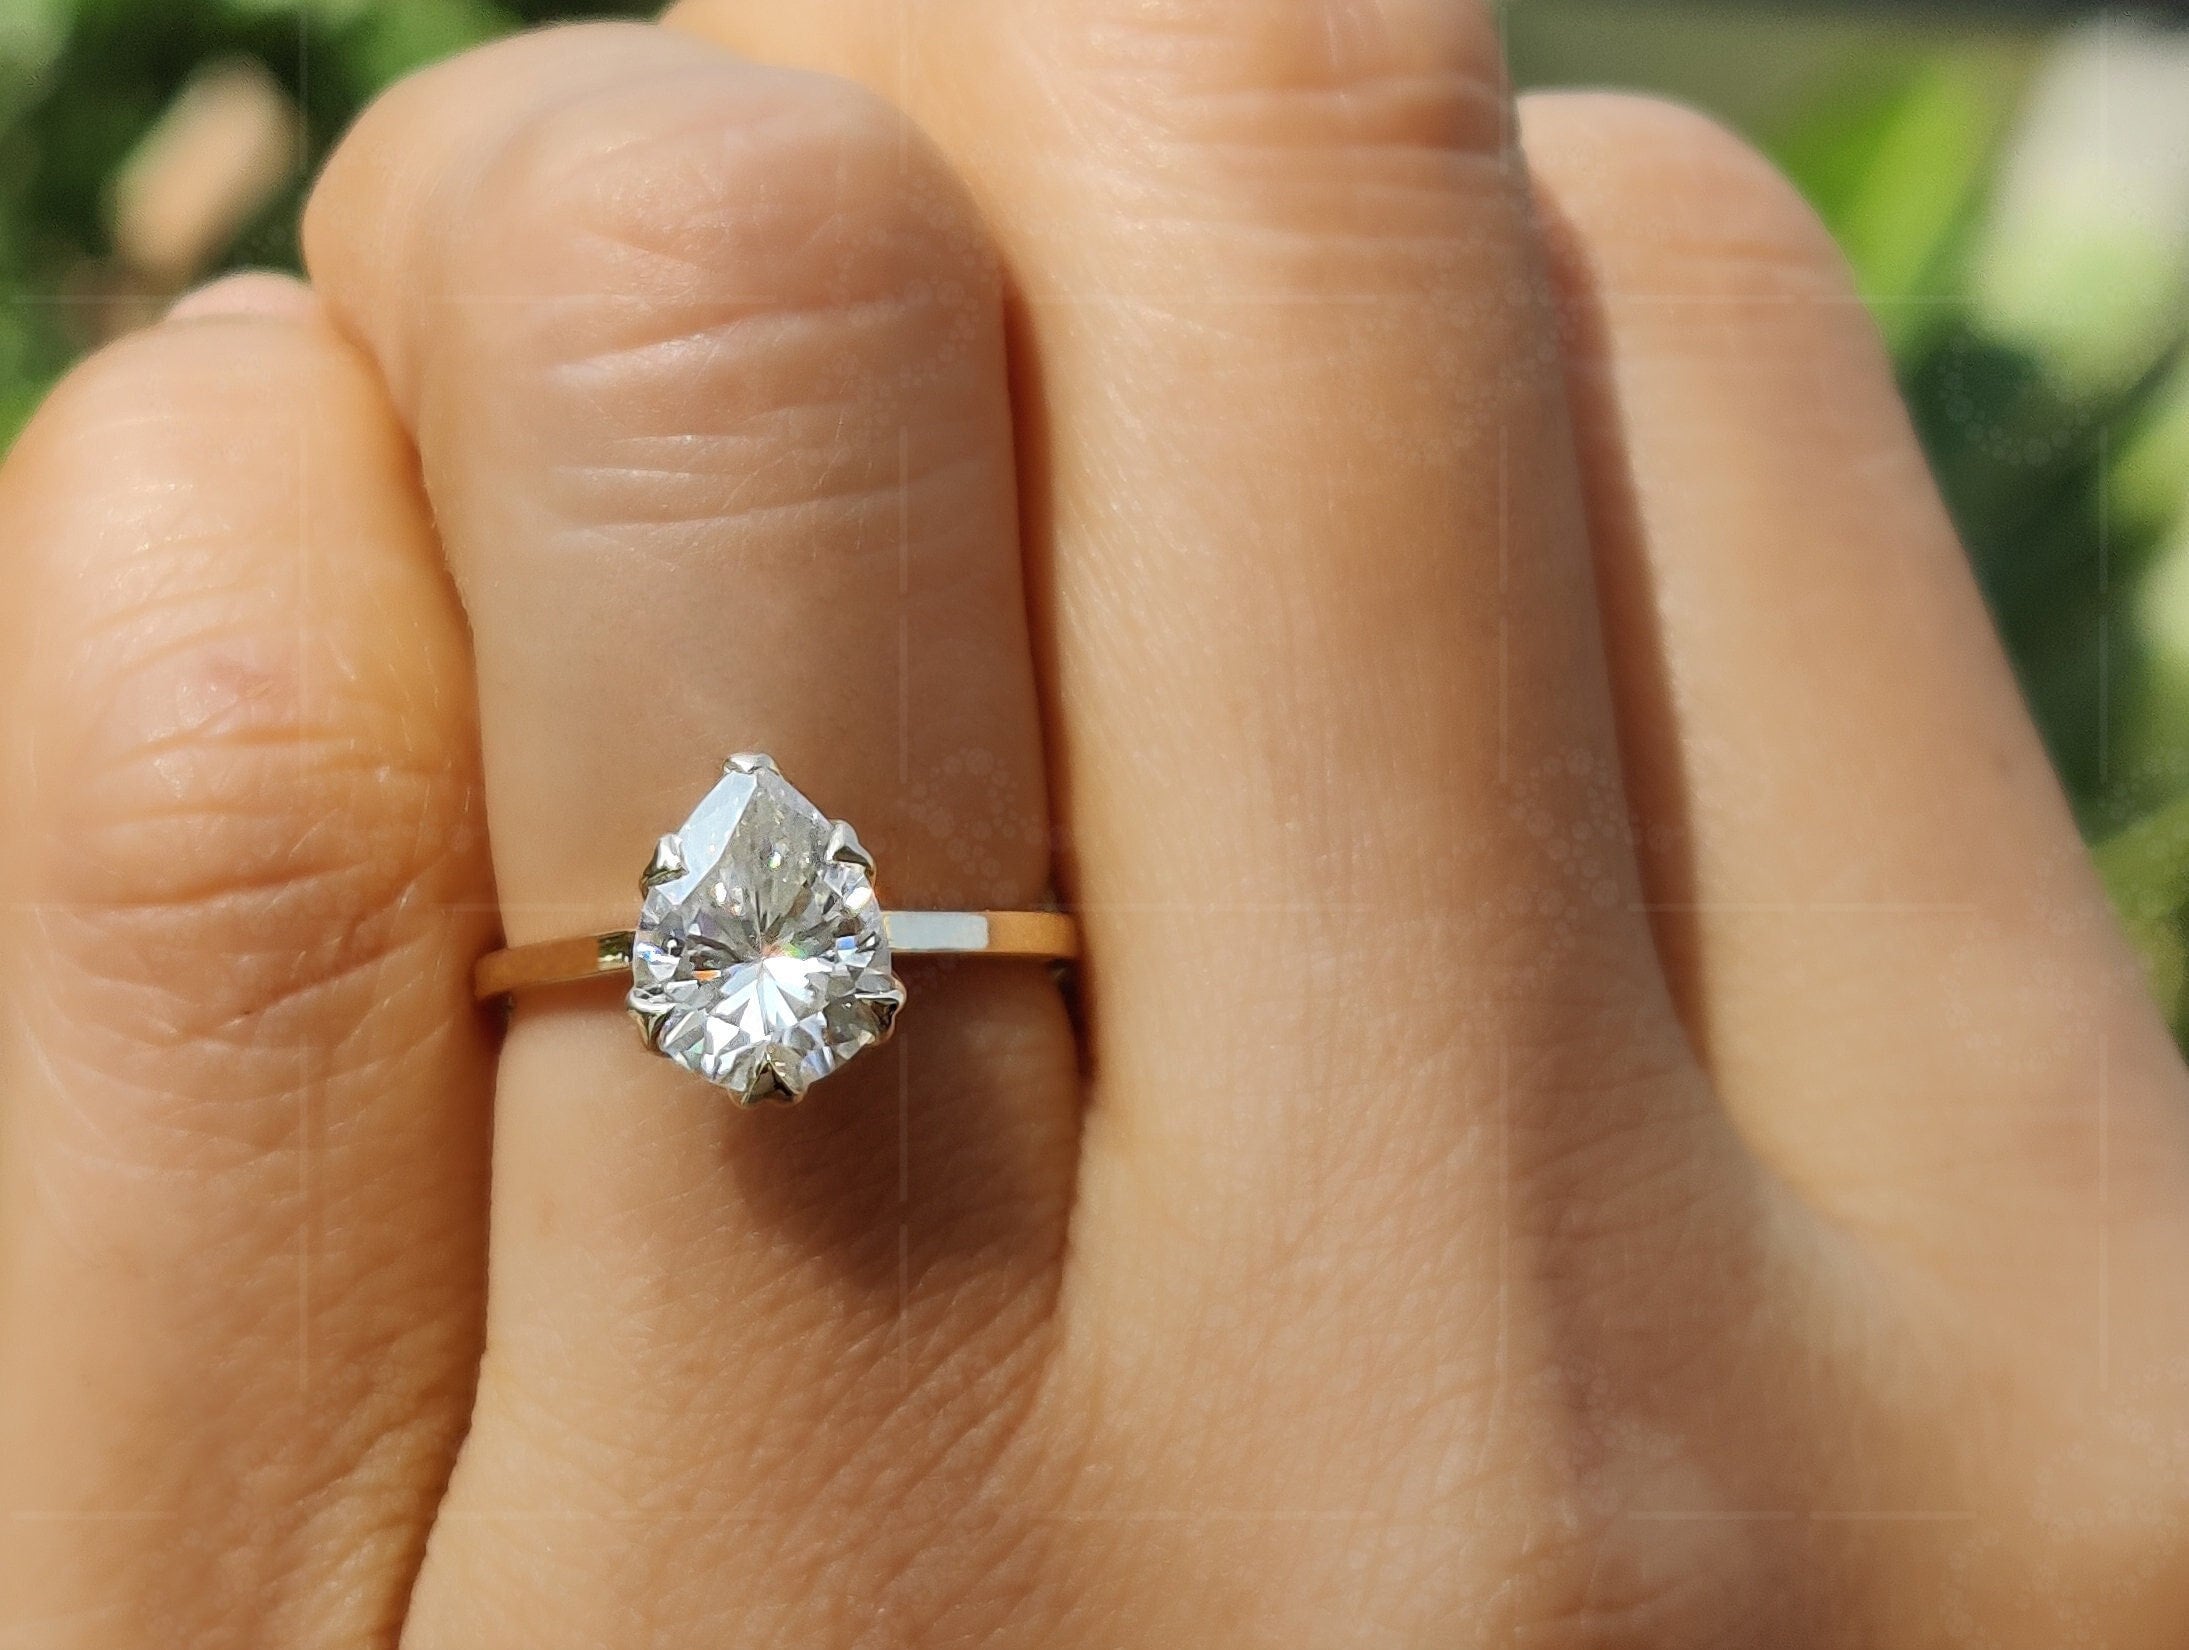 Timeless Beauty: 2 Ct Pear Shaped Moissanite Tulip Setting Ring, a Nature-Inspired Minimalist Engagement Ring